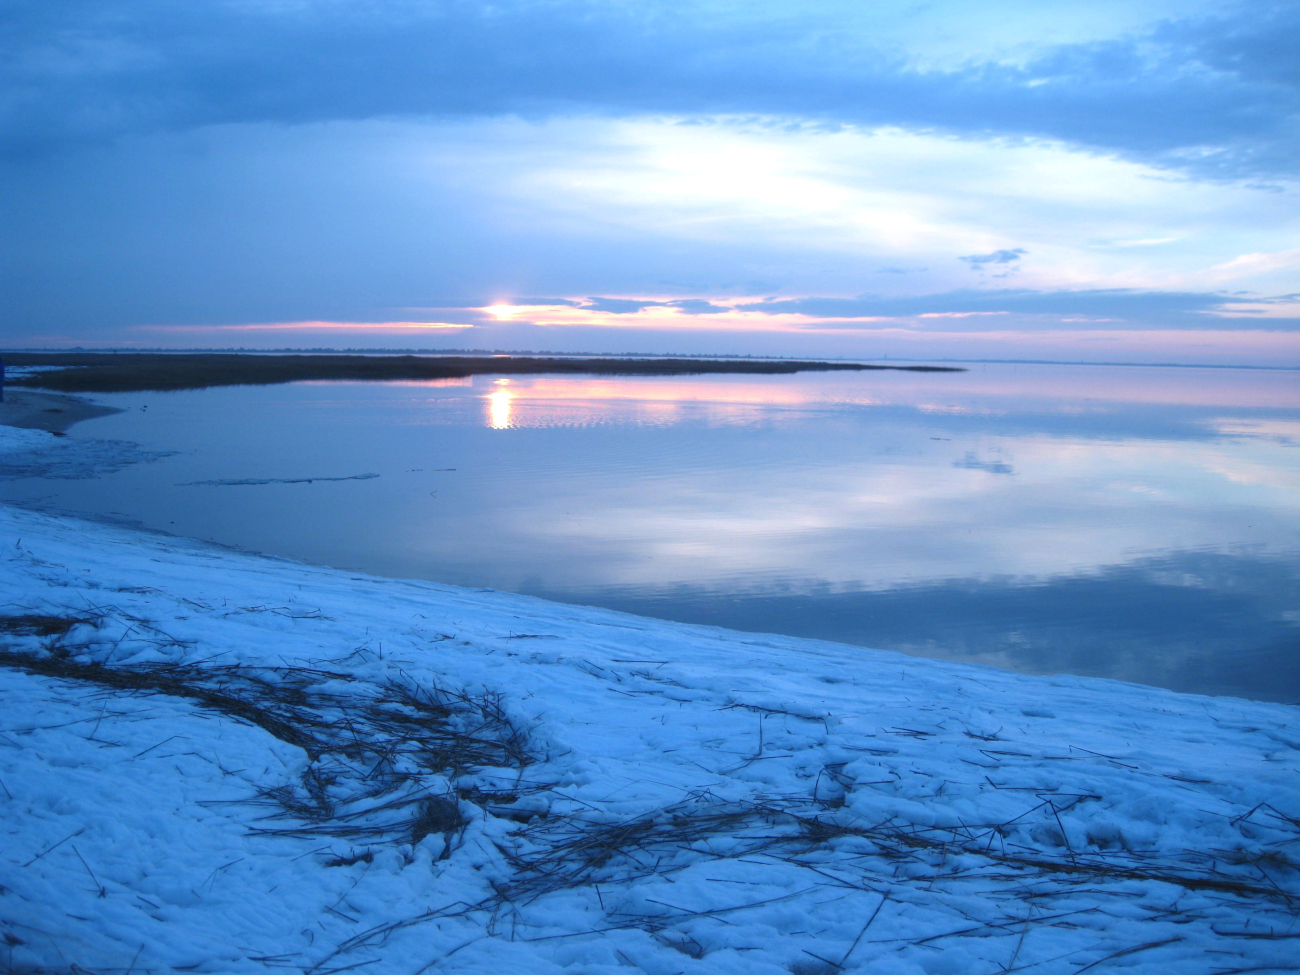 A winter sunset at Tom's Cove on the west side of Assateague Island